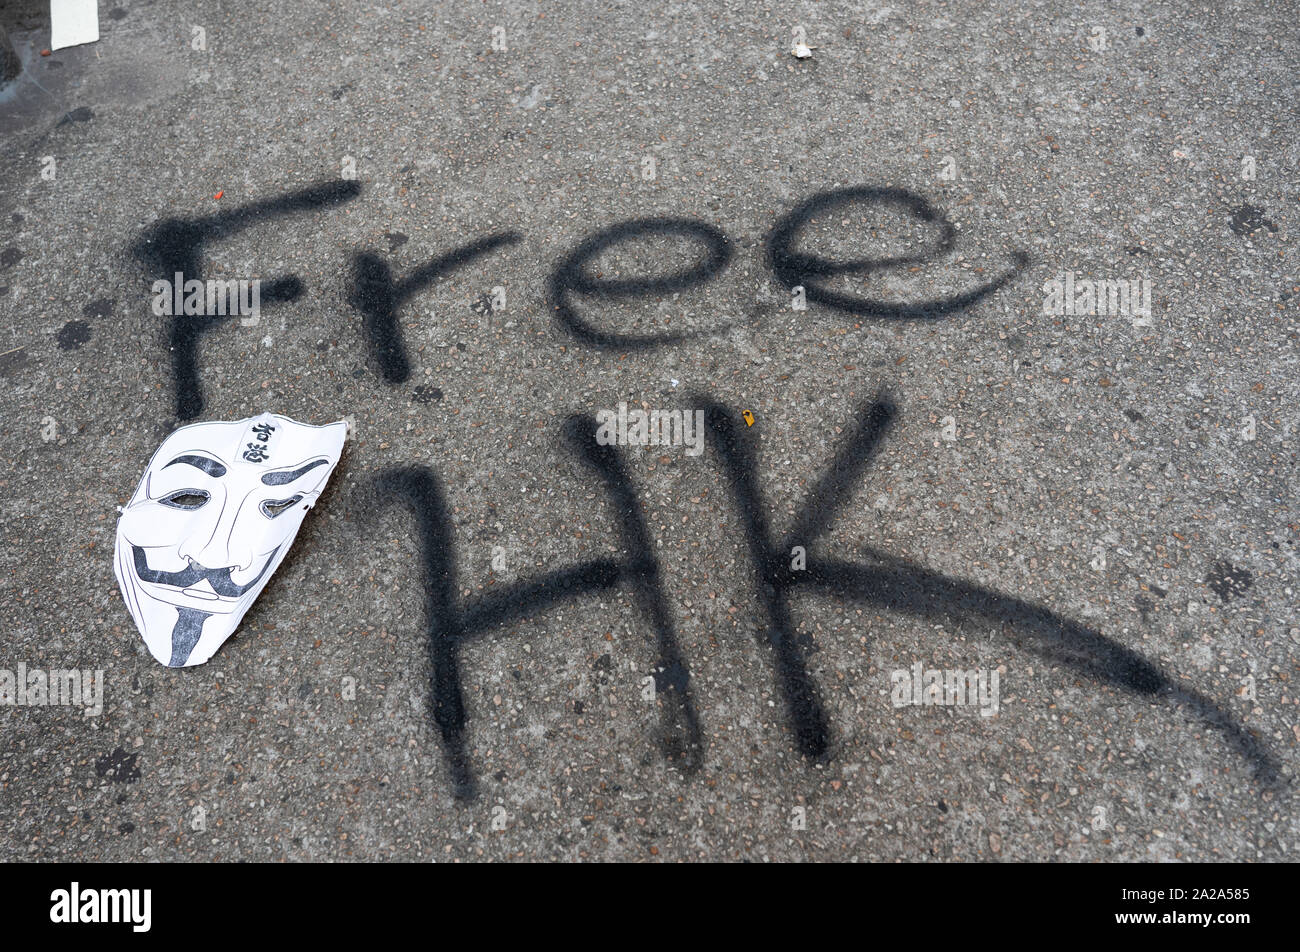 Hong Kong. 2 October 2019.  Many buildings and walls were vandalised and daubed with political slogans and anti-Chinese government and anti-police graffiti in Central and Wanchai districts by pro-democracy supporters on China's National Day on 1 October. Widespread clean-up operation is now underway. Iain Masterton/Alamy Live News. Stock Photo